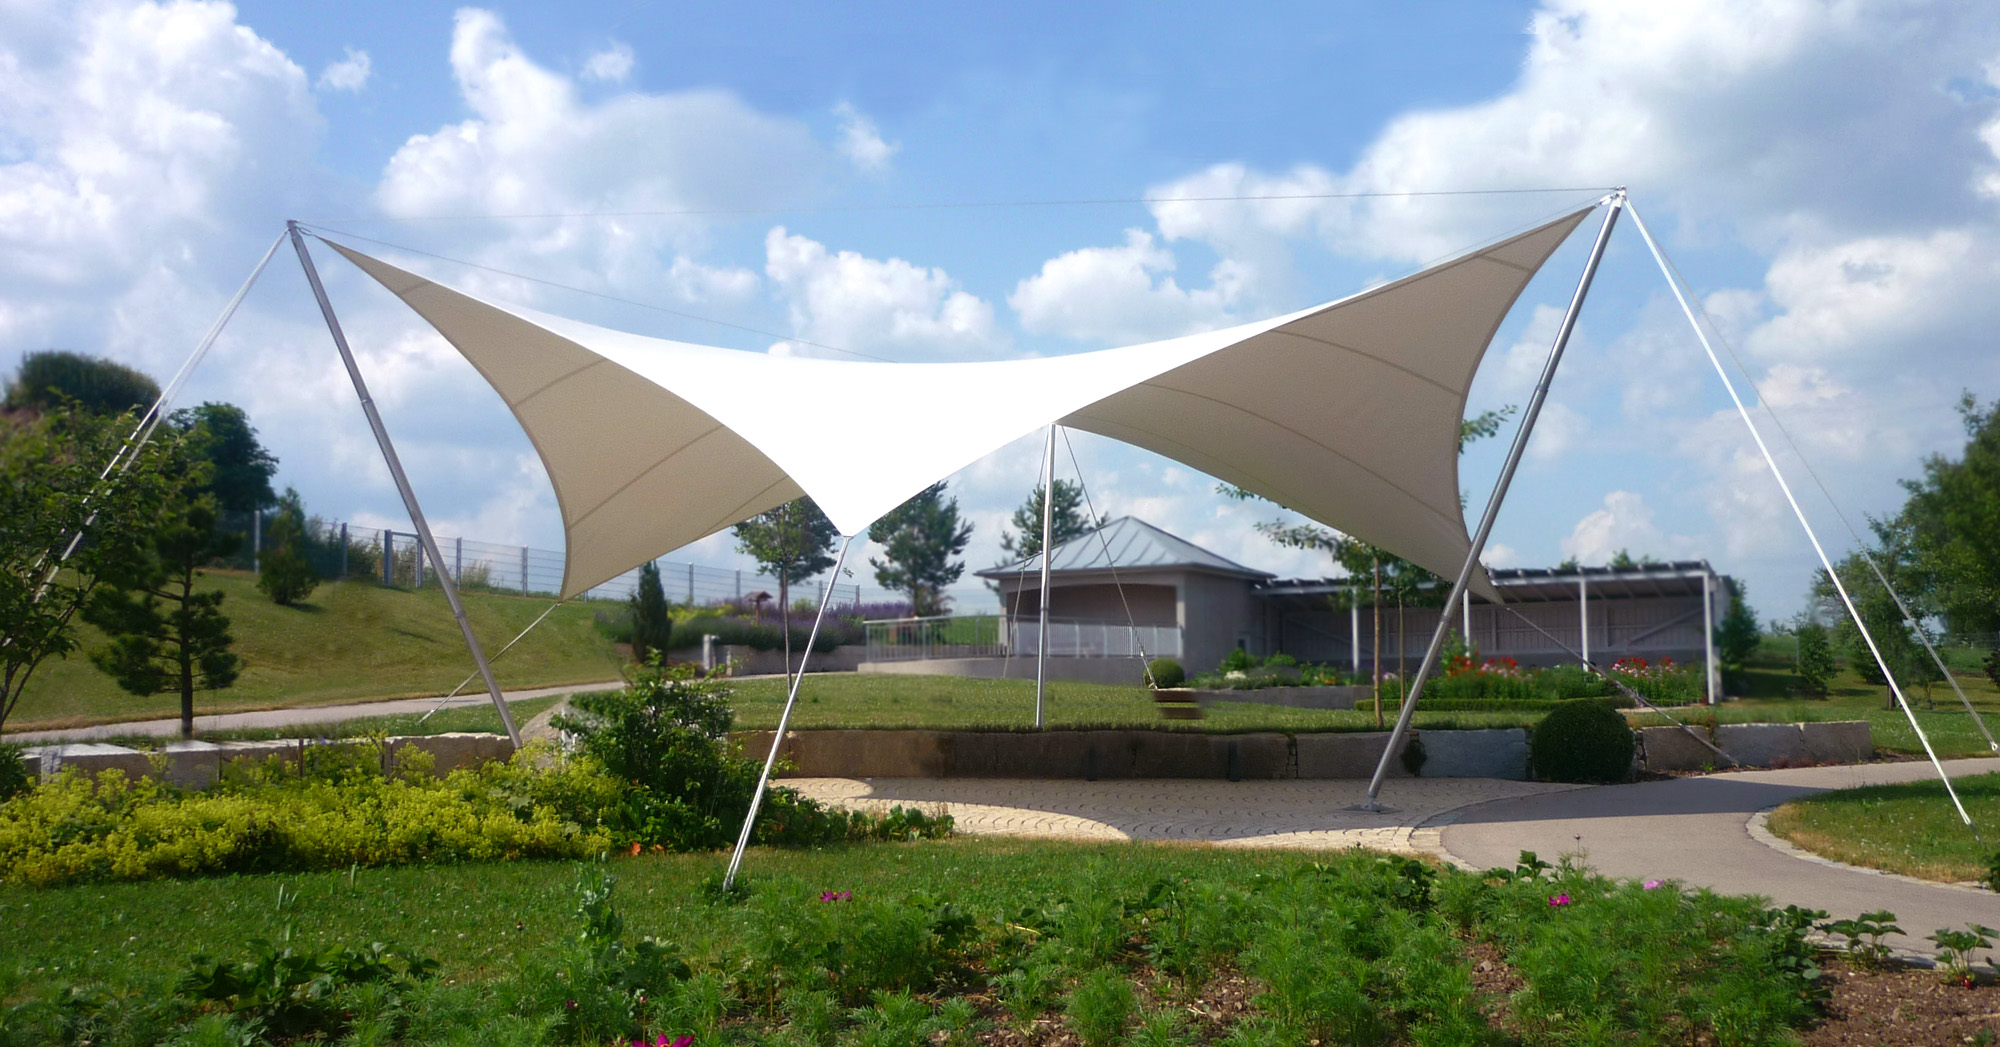 The open tent and awning "Star Wave" can be temporarily installed in the park or public space.